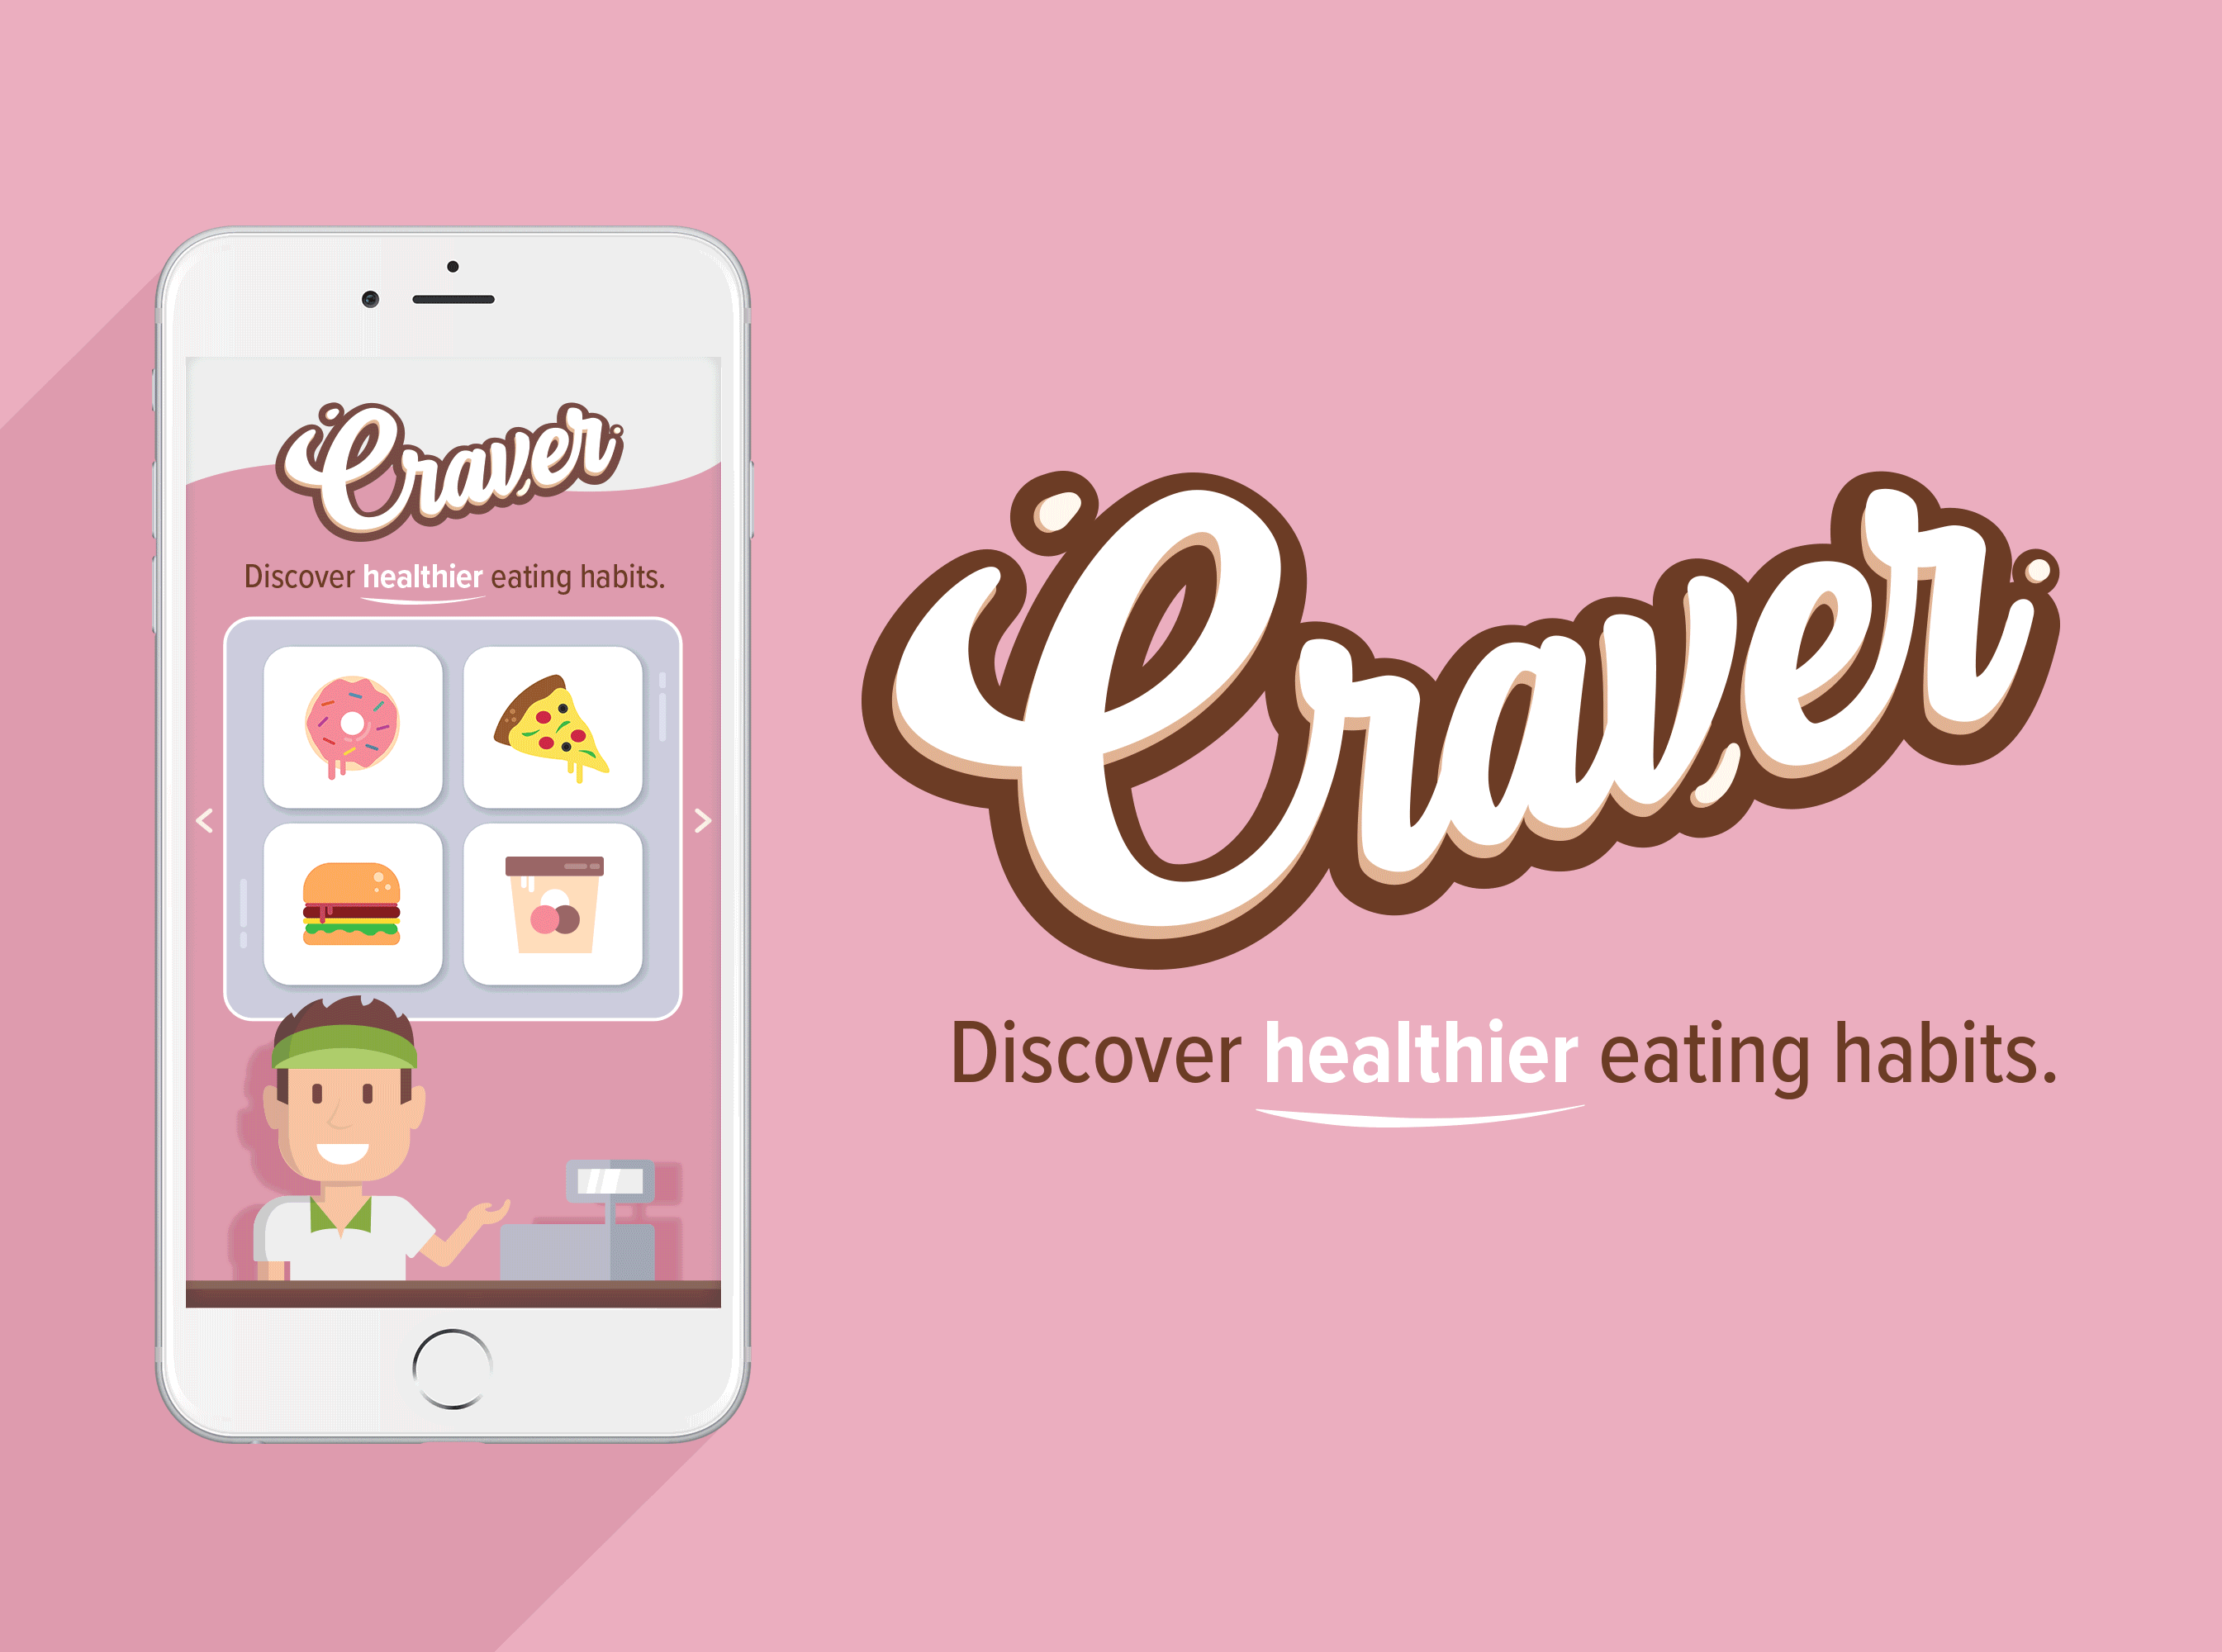 The branding for a healthier eating habits app called Craver showing both the logo and phone mockup